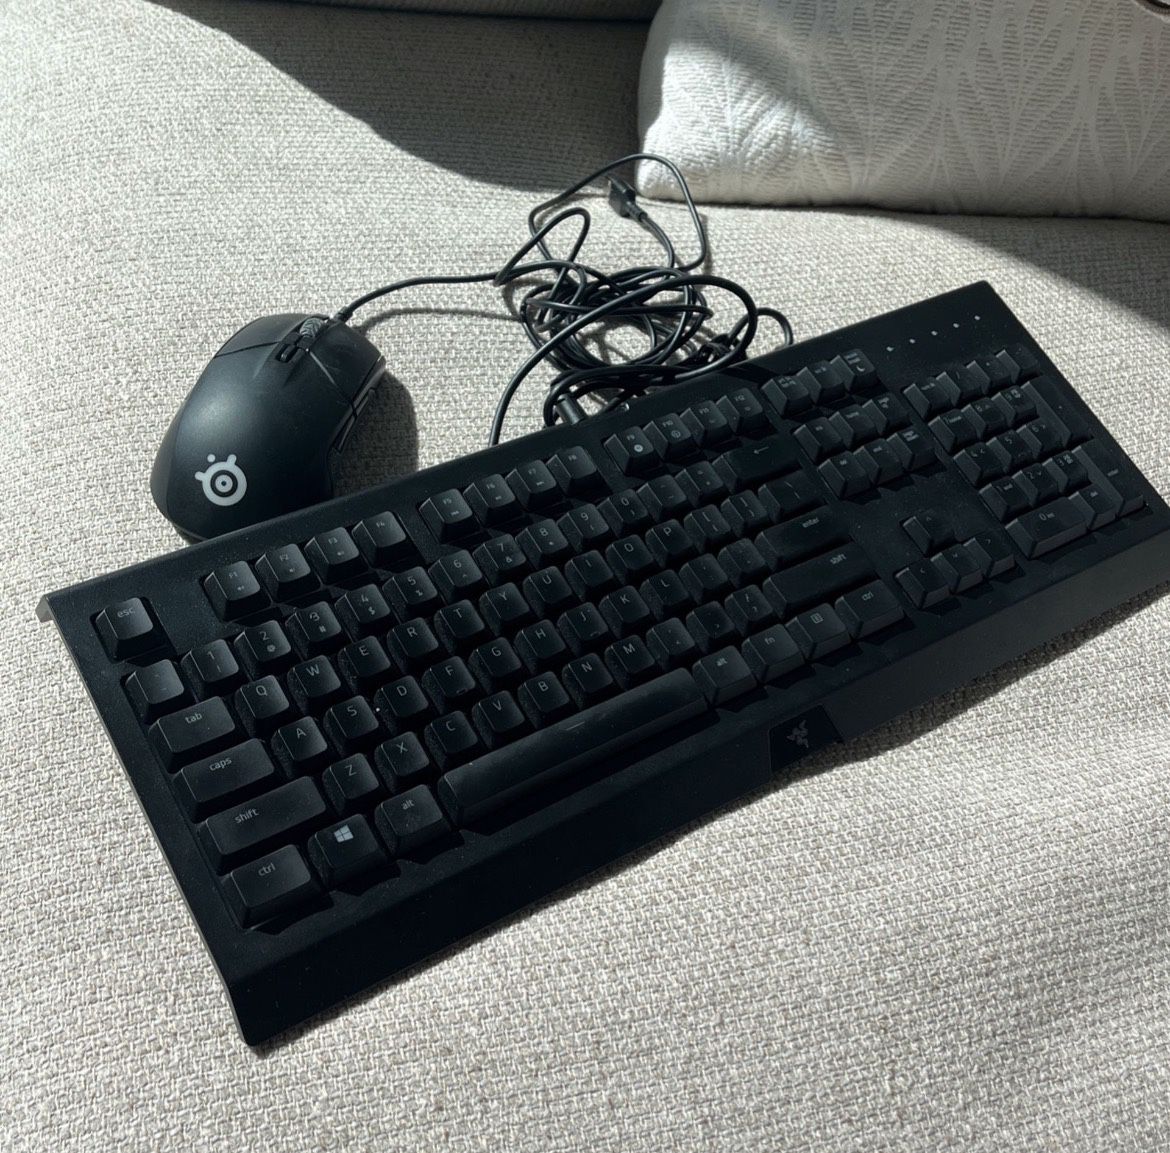 Mouse and Keyboard (Razer, Steel series)